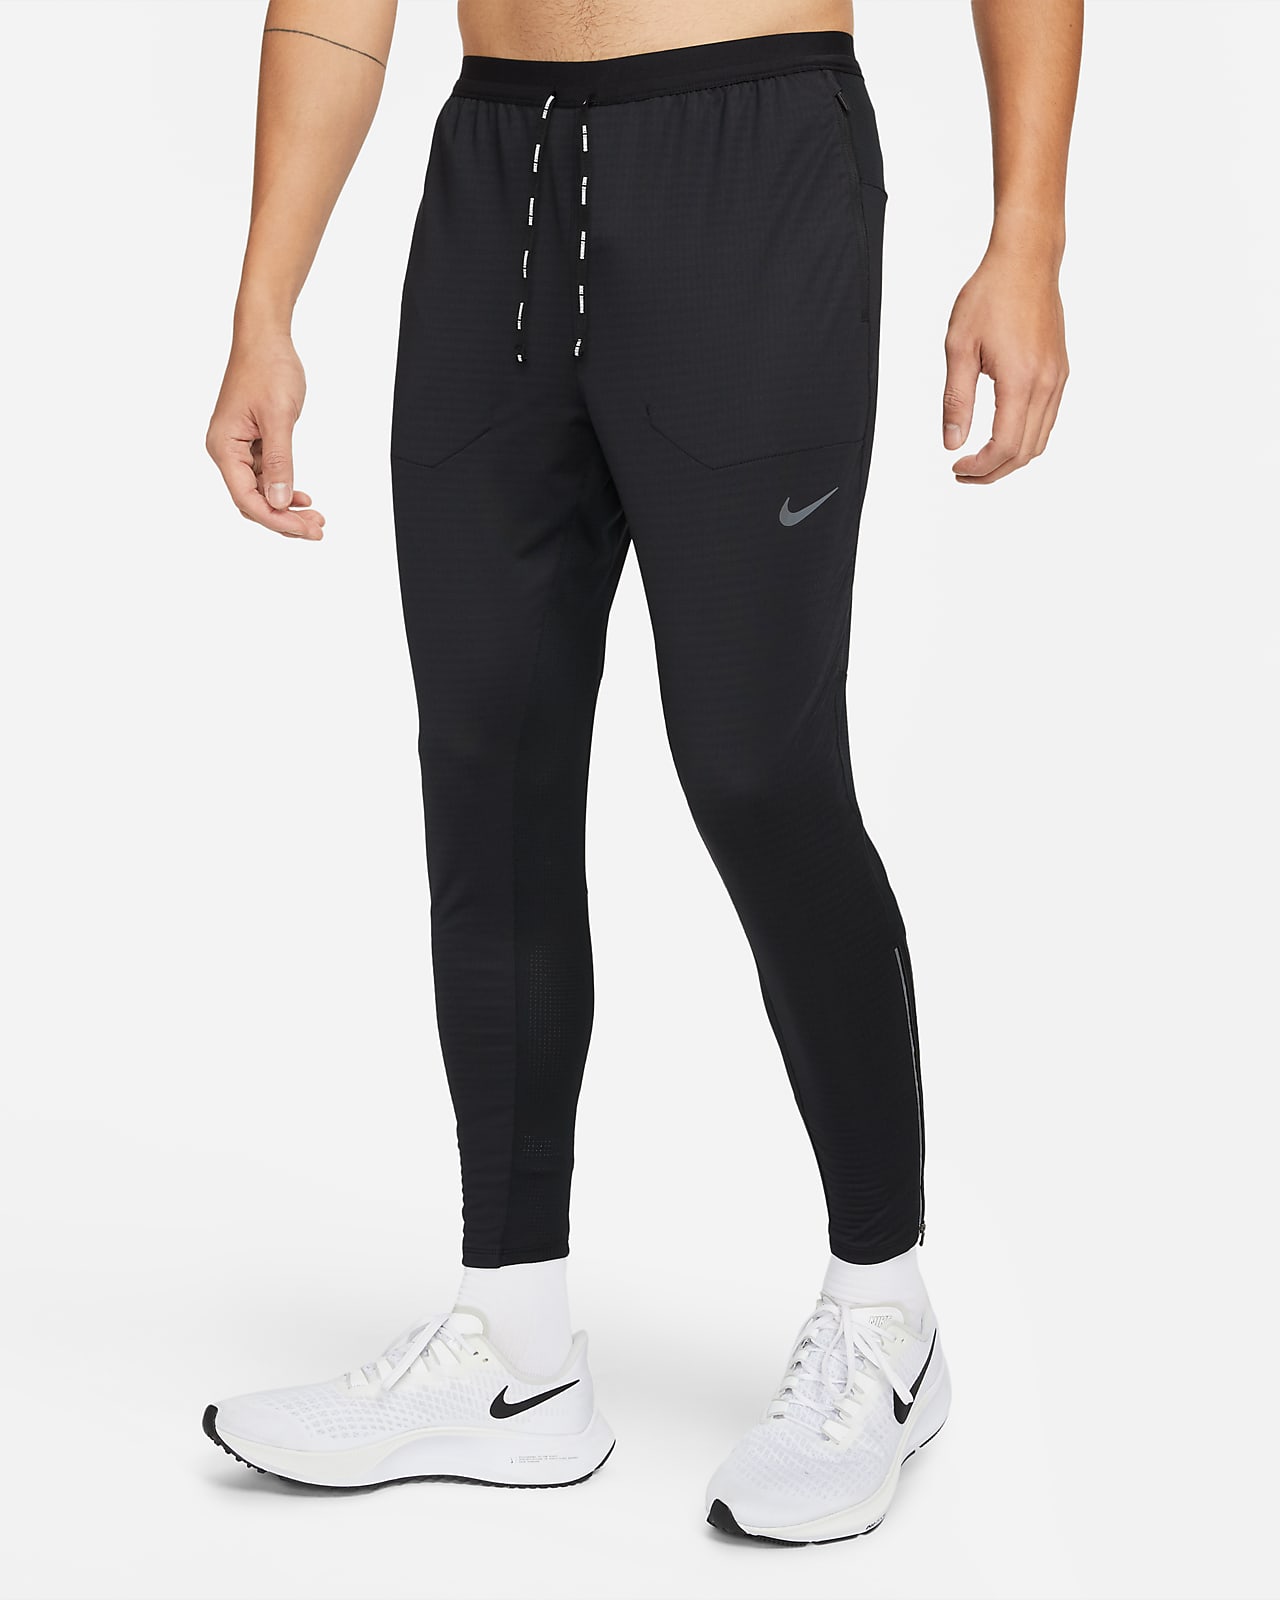 mens nike sweatpants with elastic ankles